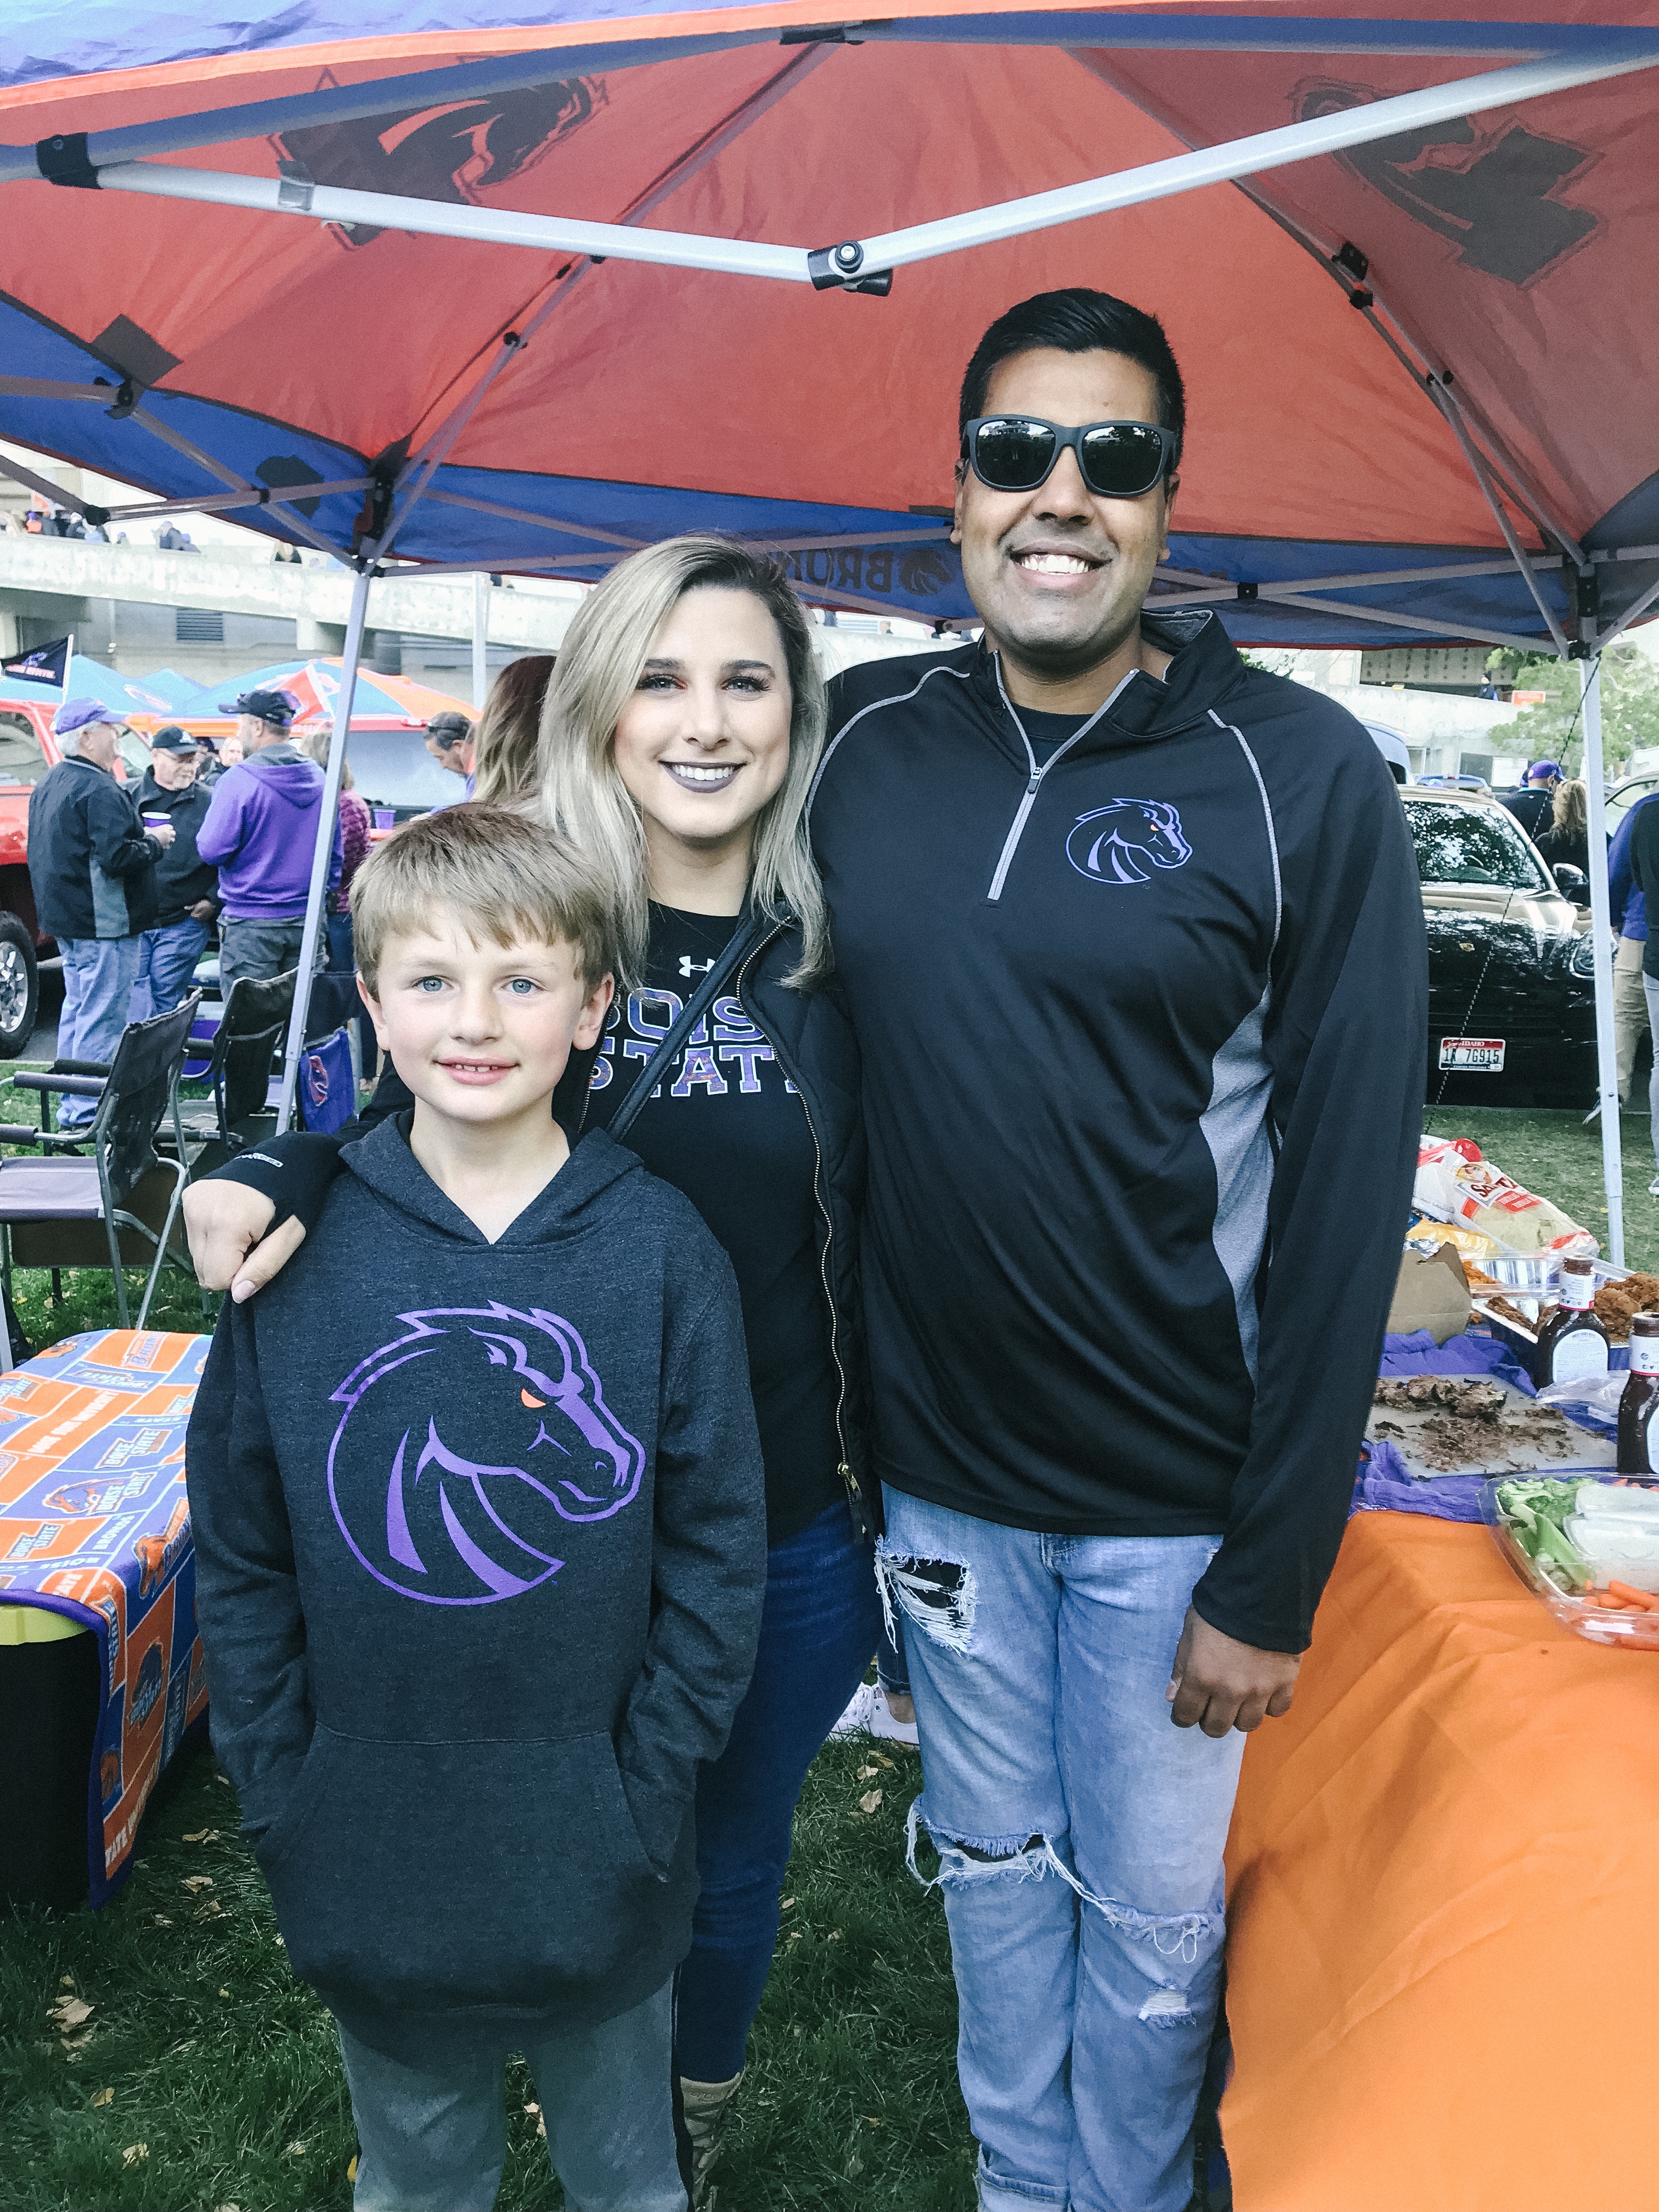 Brodie Taylor, Erin Taylor, and Vijay Singh tailgating during the 2019-2020 Boise State Football season.